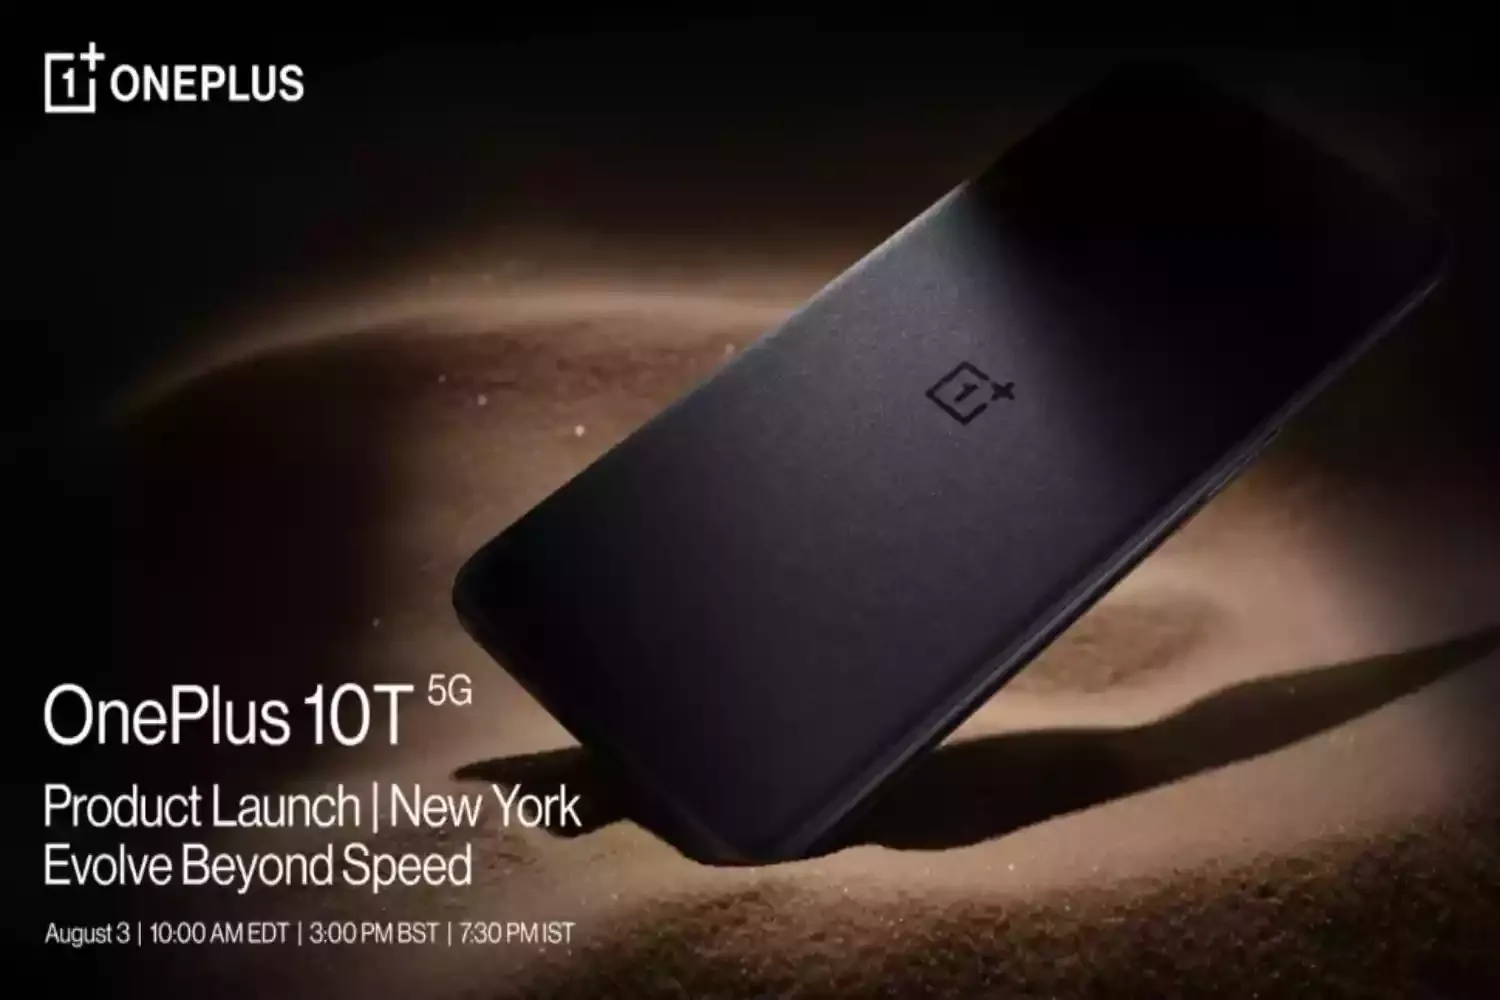 OnePlus 10T will launch on August 3